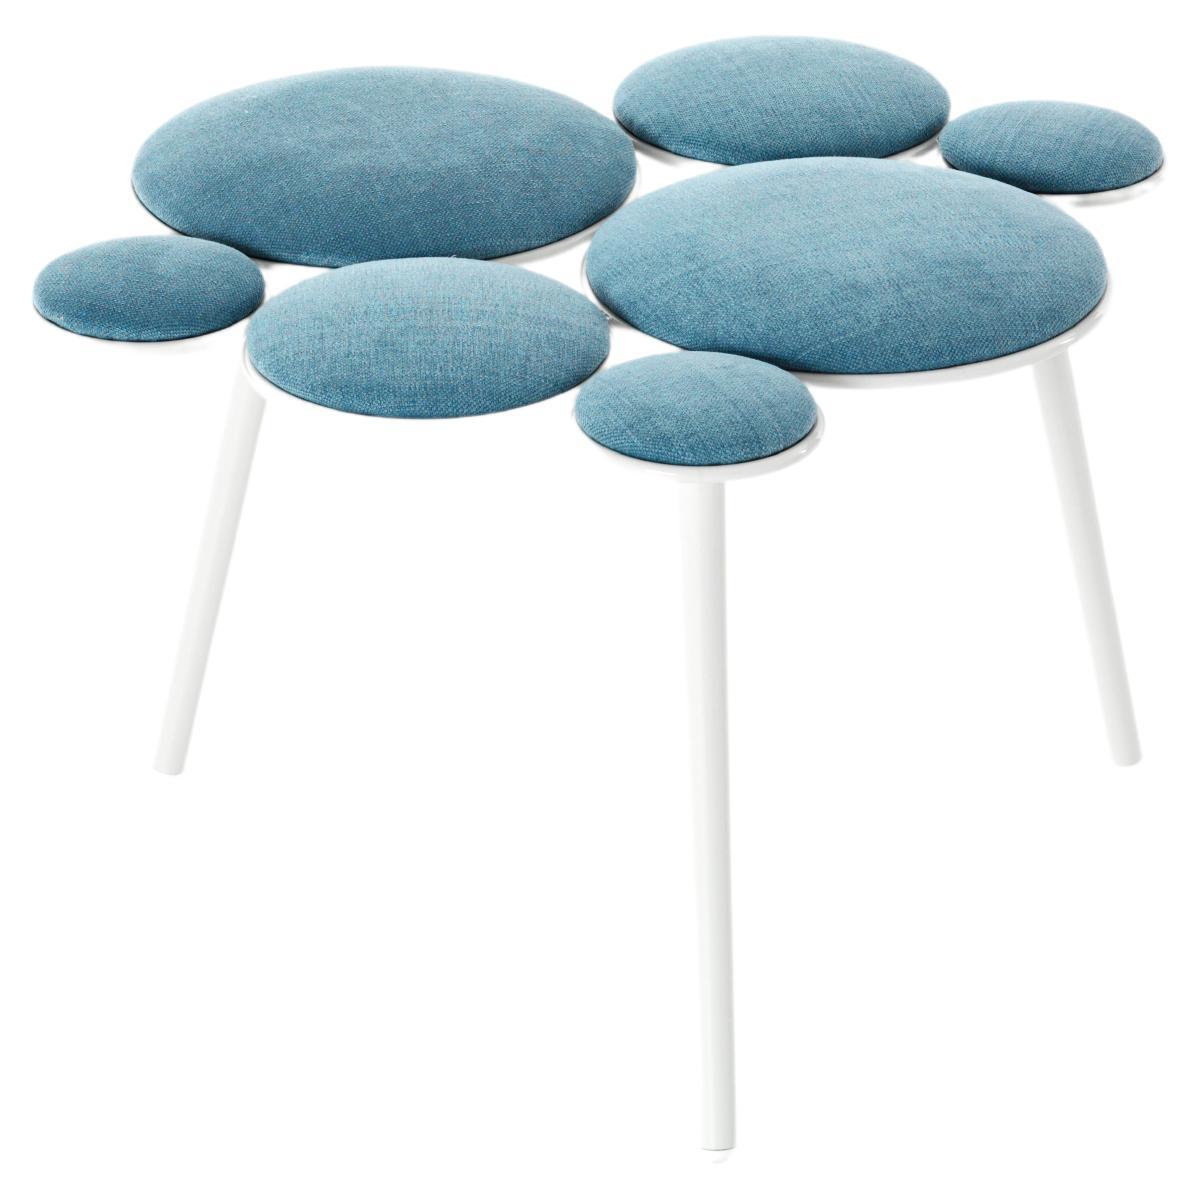 Grace Coffee Table in Vip Blue Upholstery with Light Gray Frame by Paolo Grassel